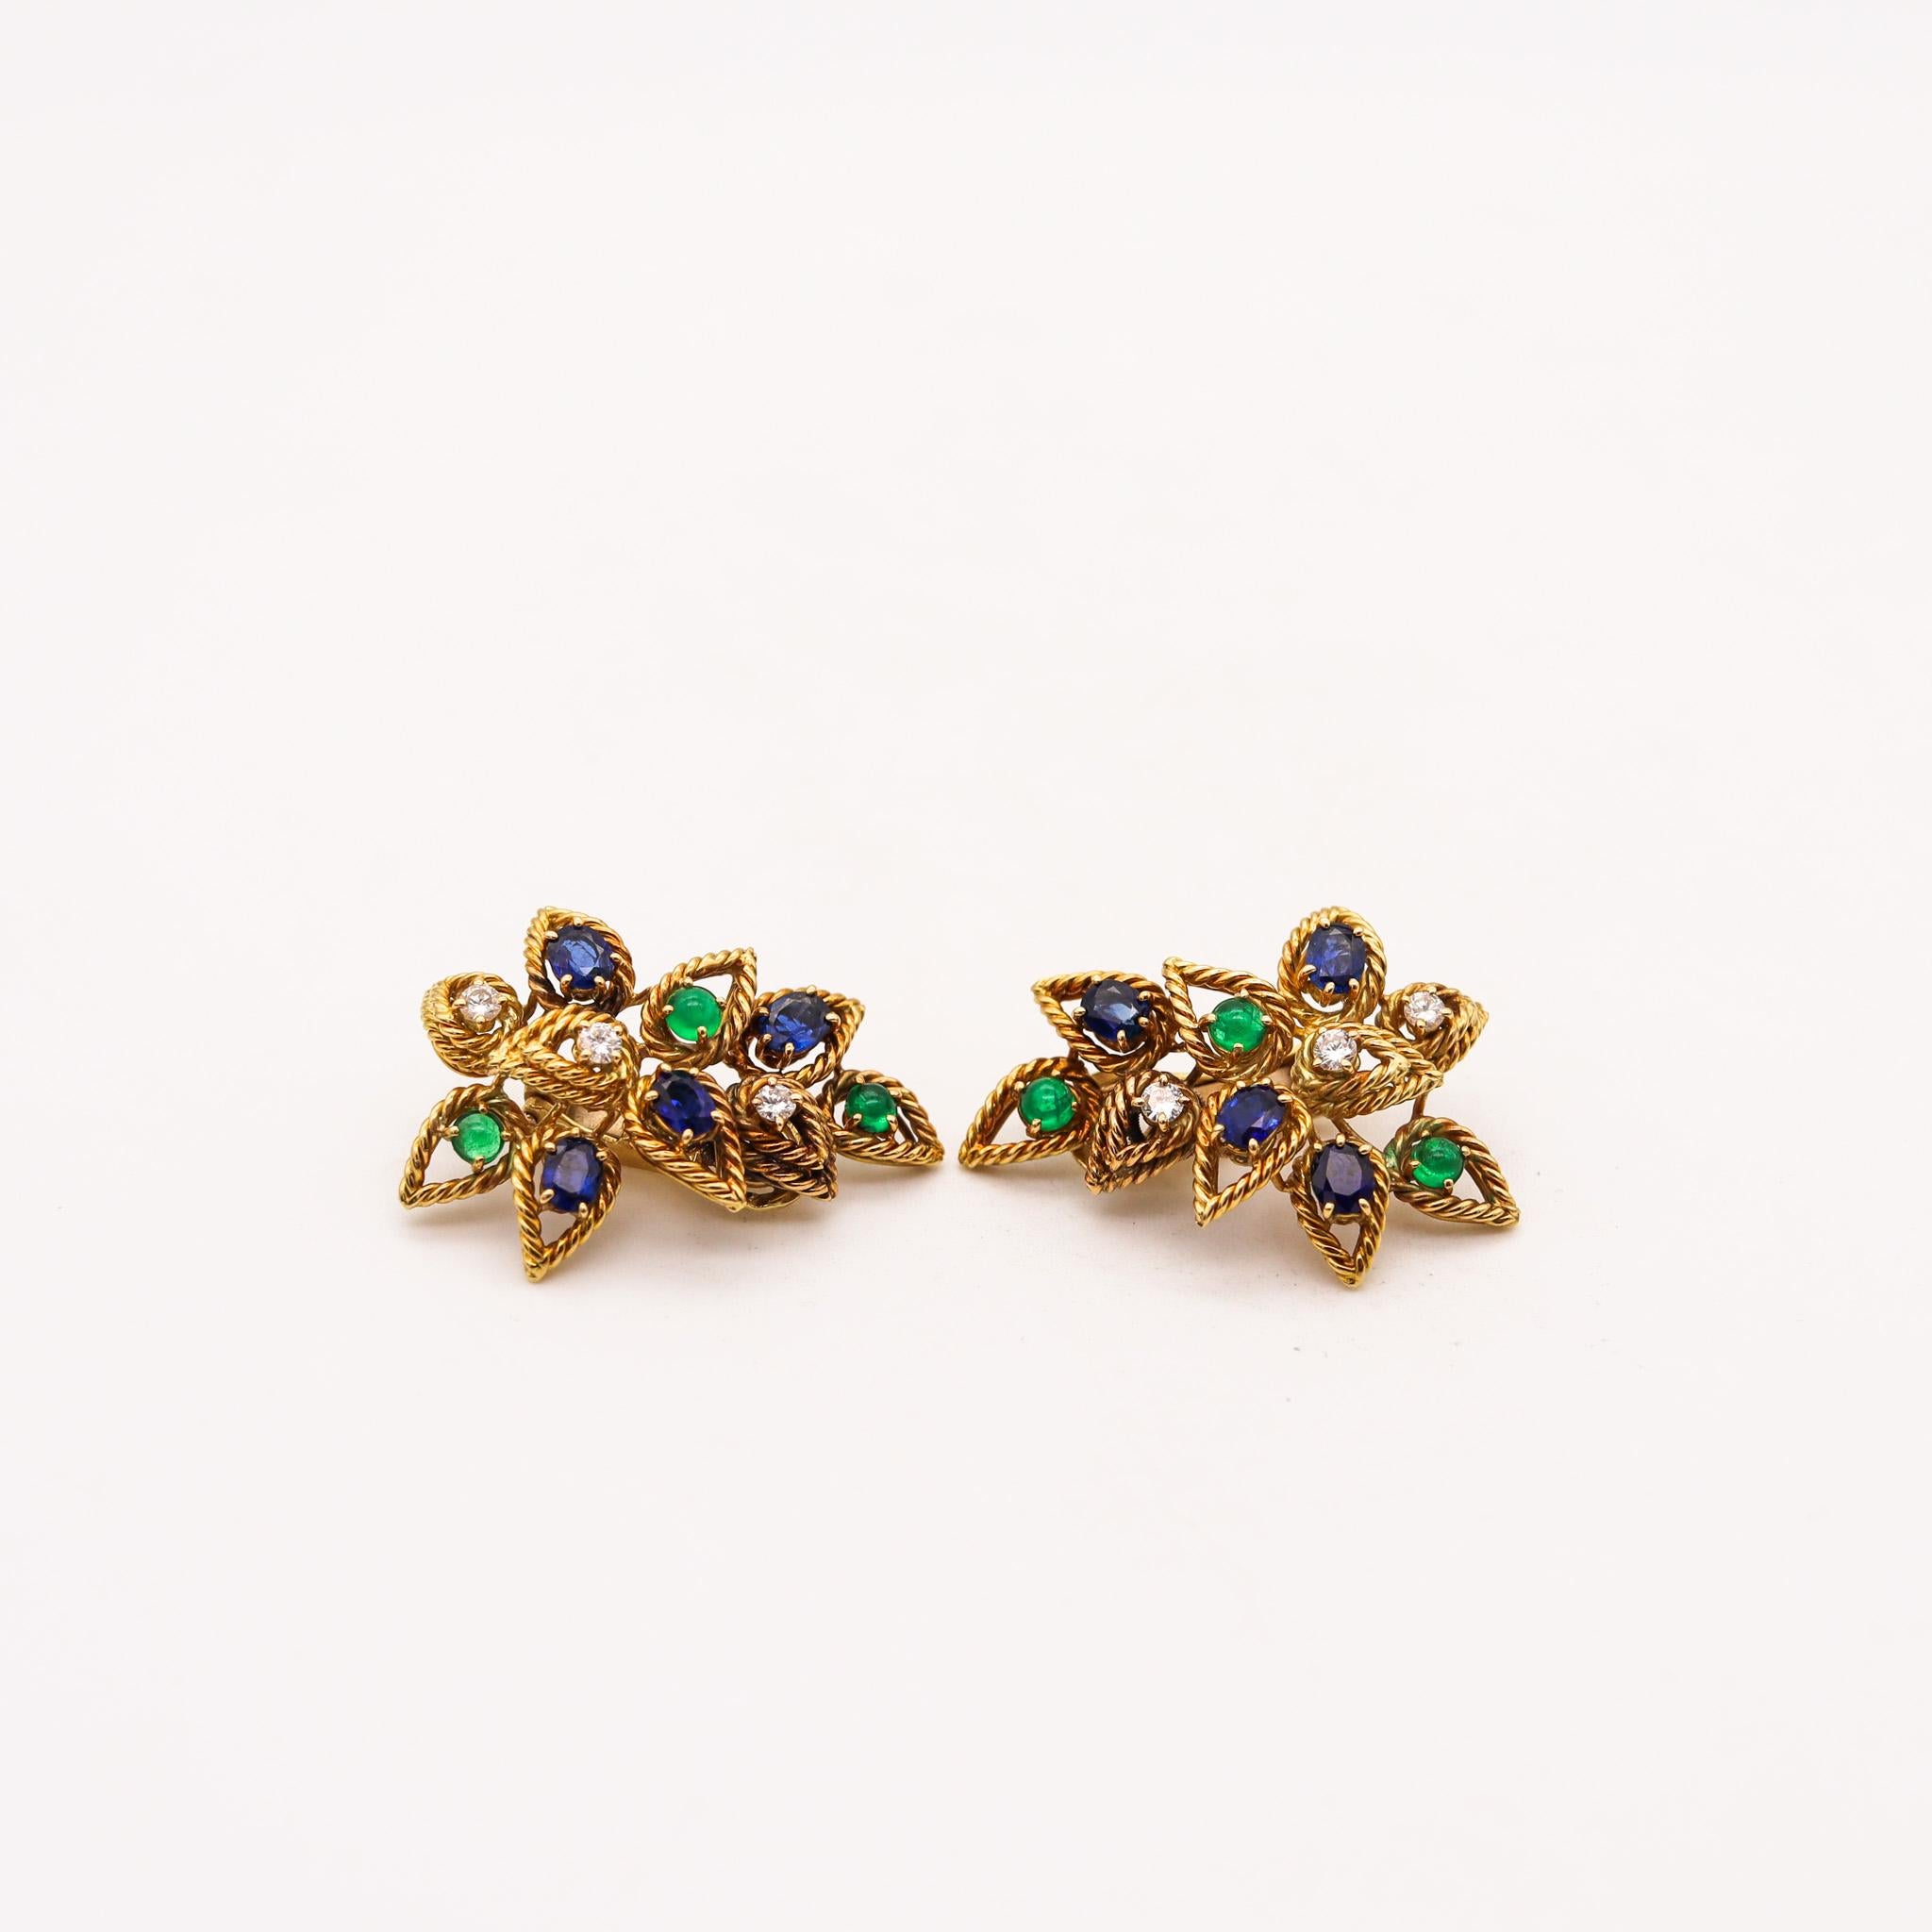 Cocktail ear clips with natural gemstones.

Very beautiful and colorful pair of modernists ear clips, created in Italy back in the late 1960's. They was carefully crafted with twisted wires made up in solid yellow gold of 18 karats, with textured